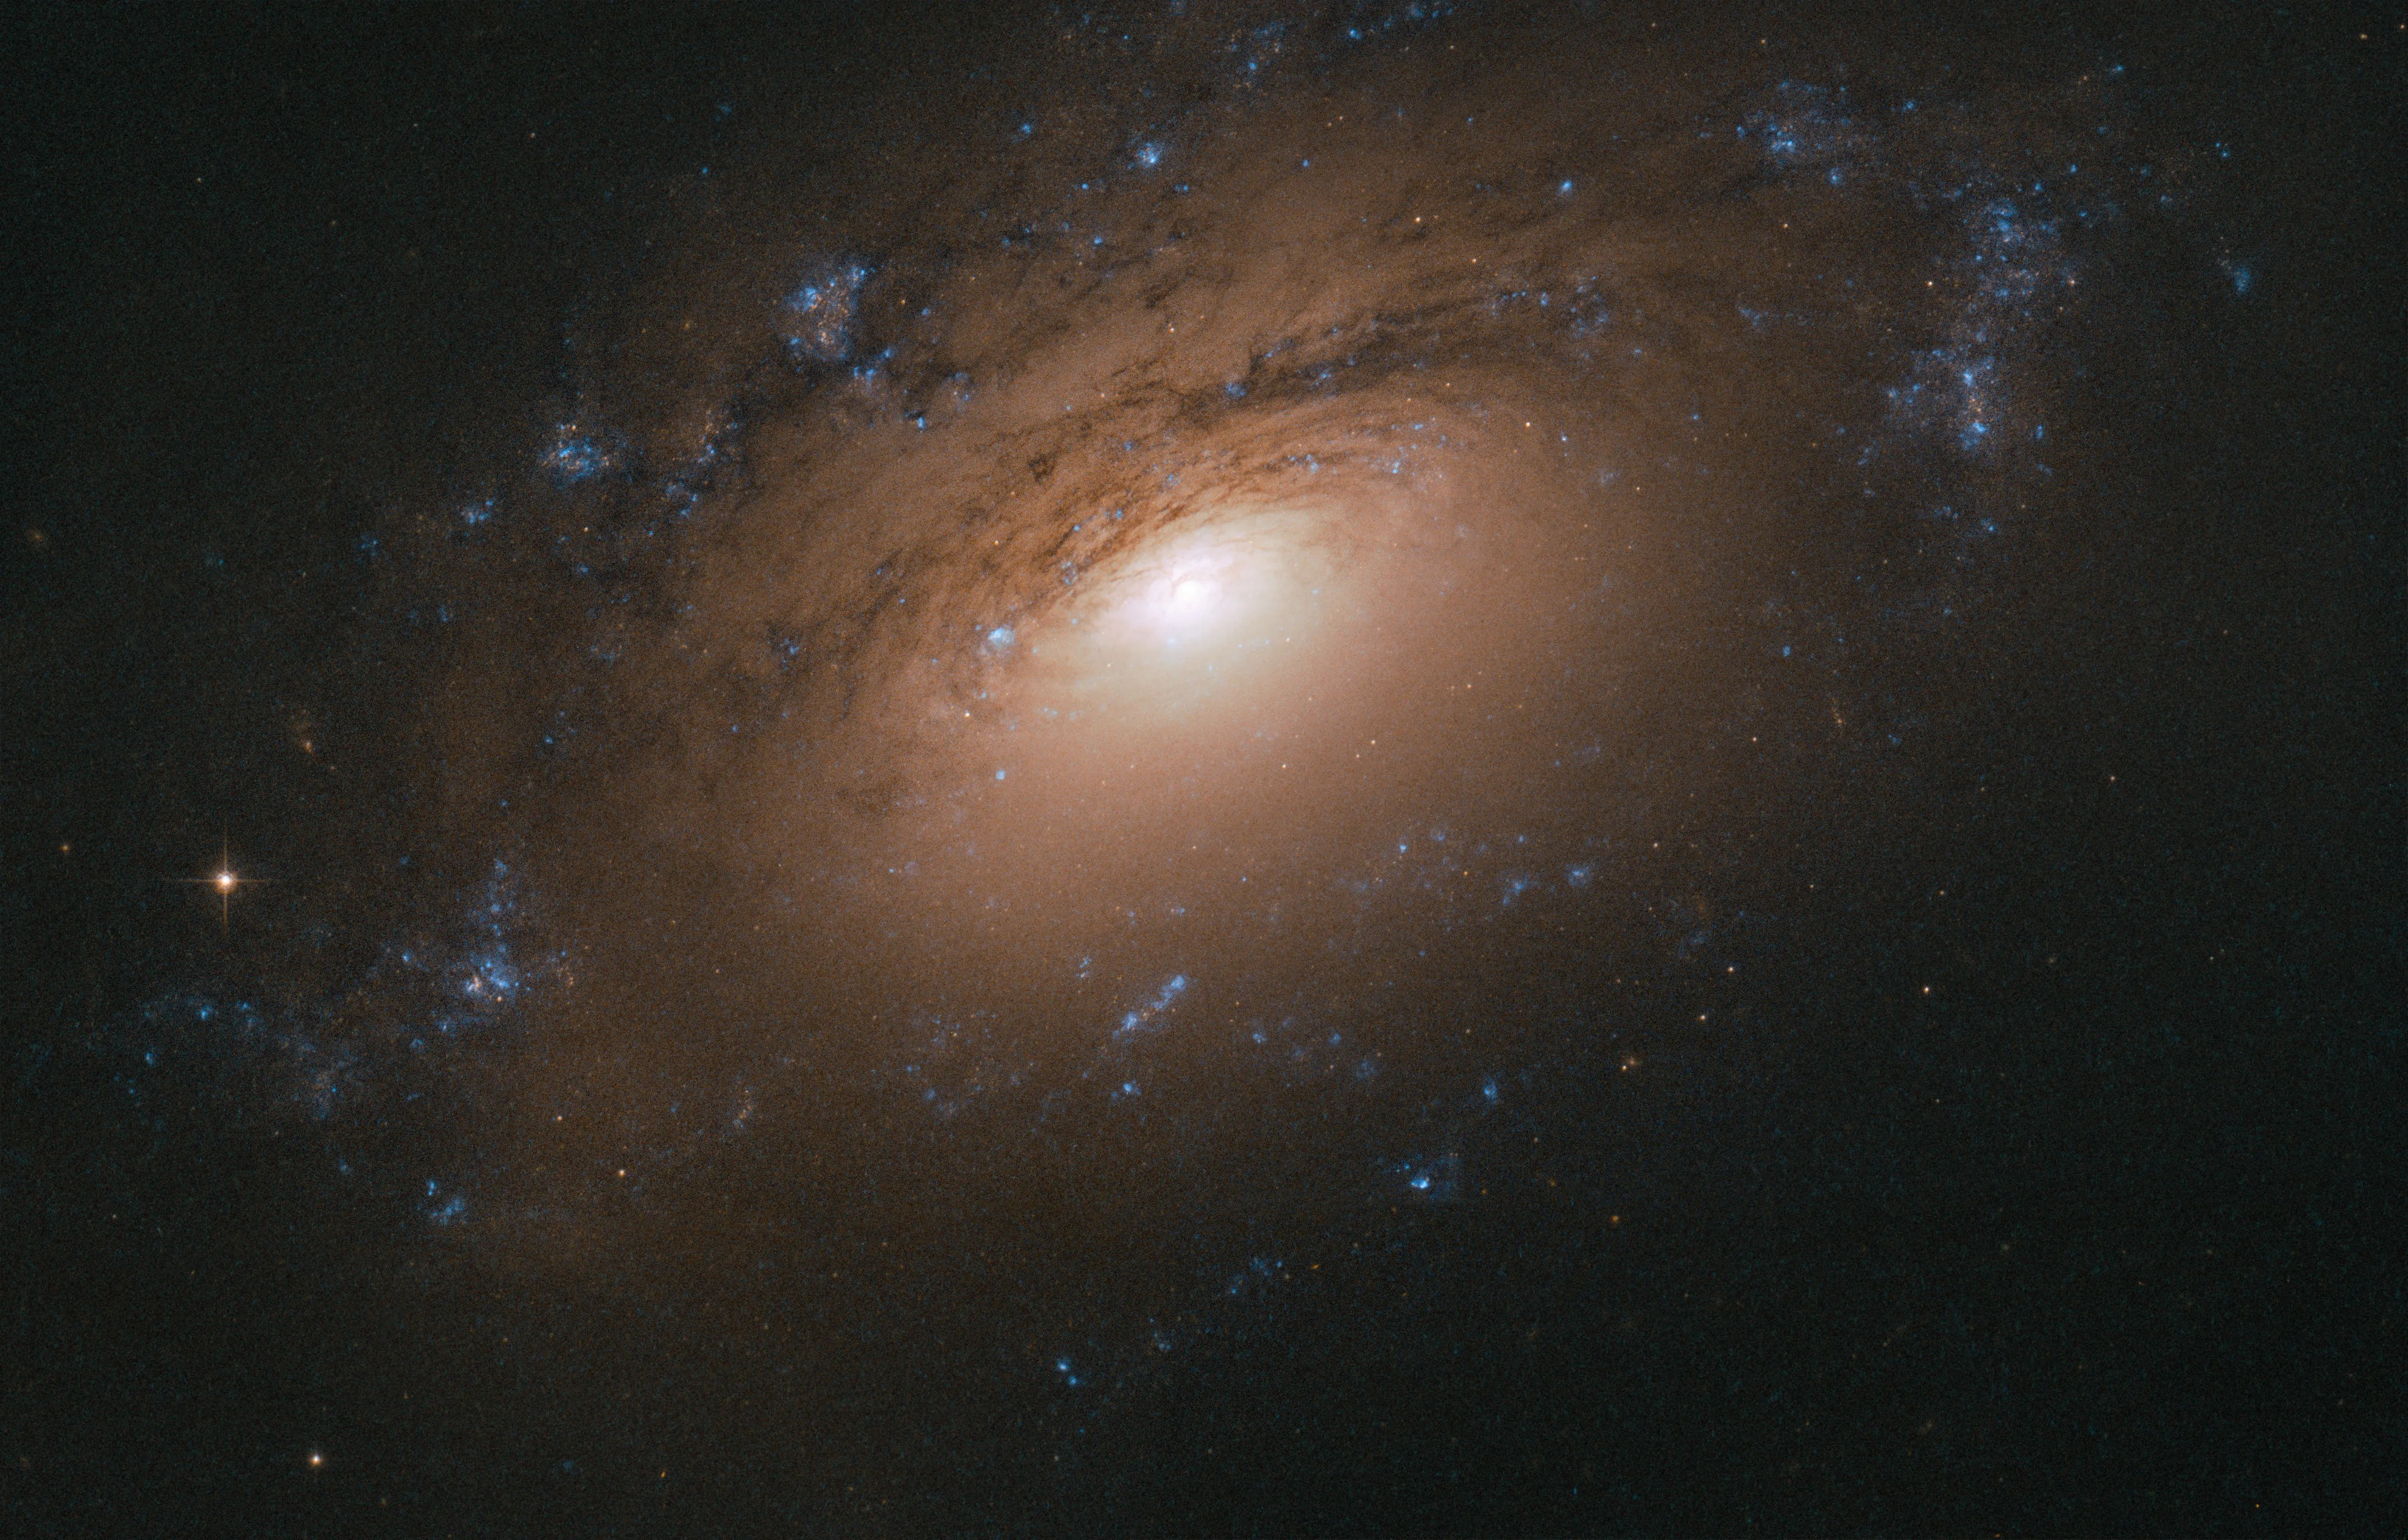 Ngc 3169 spiral galaxy, as seen by hubble